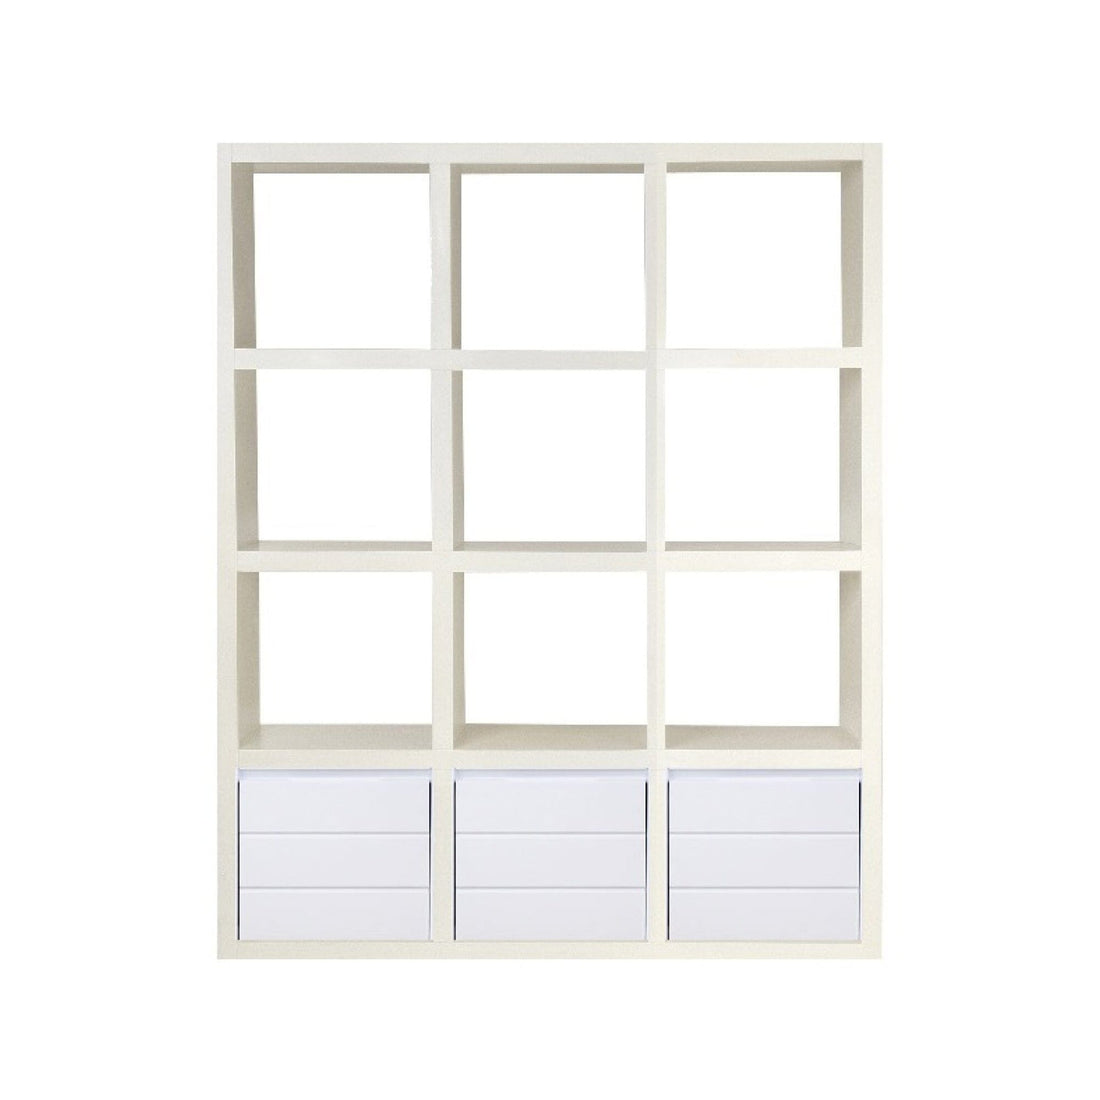 Cube Shelving with Drawers (3 high x 3 wide) Office &amp; Storage Furniture Beachwood Designs White 